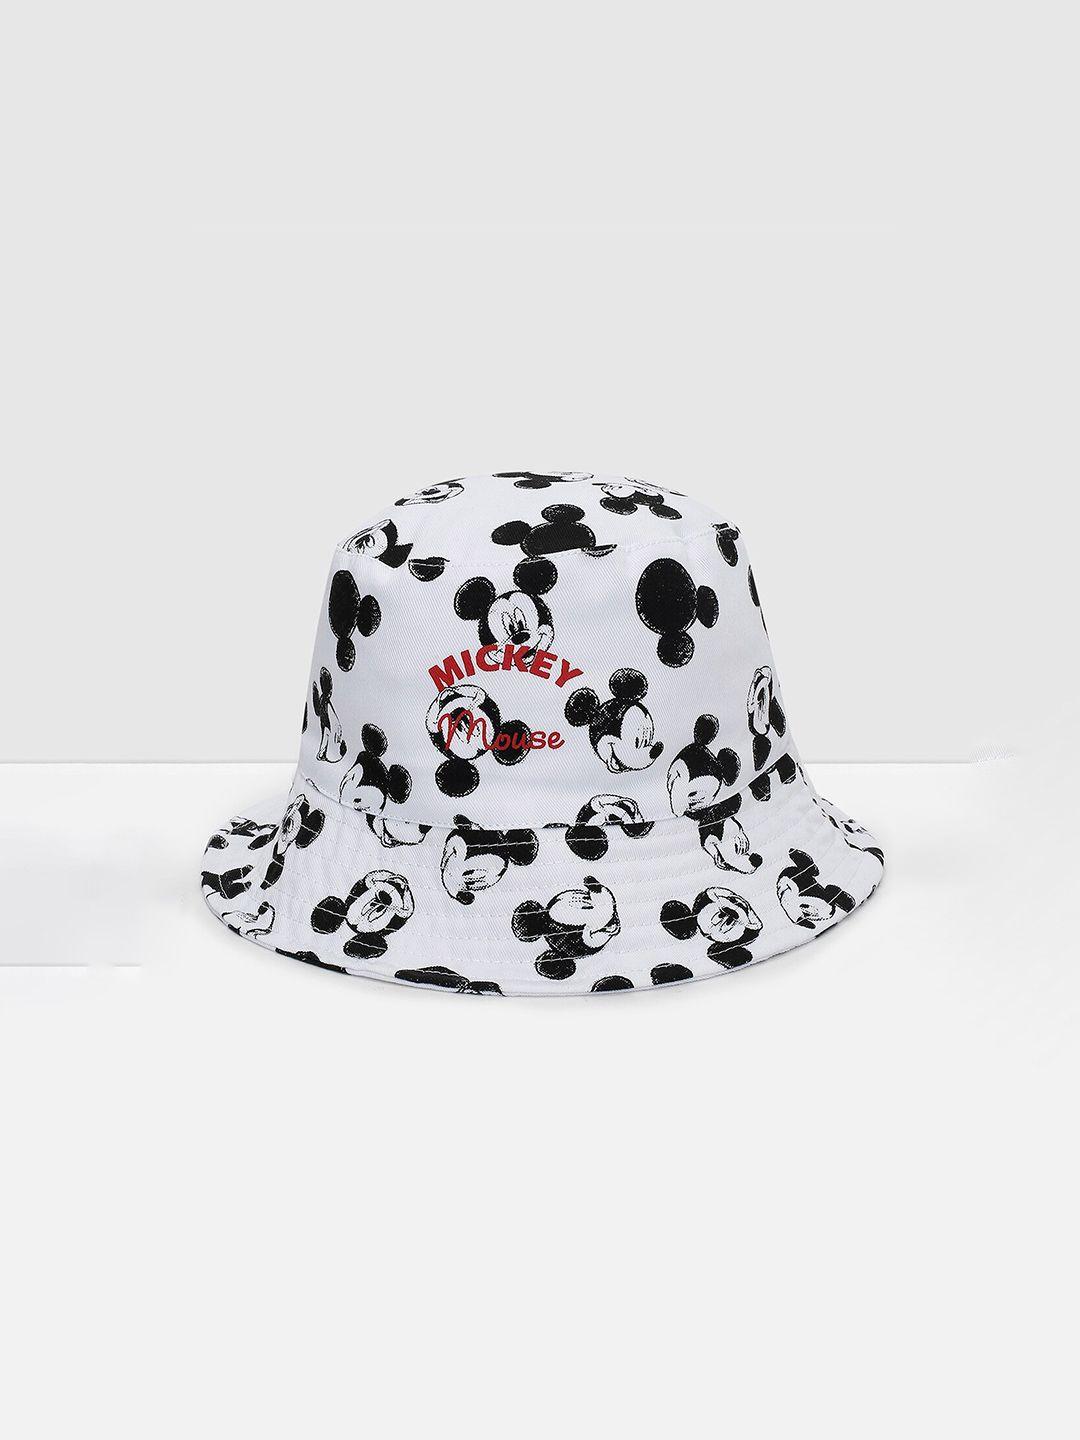 max Boys Mickey Mouse Printed Bucket Hat